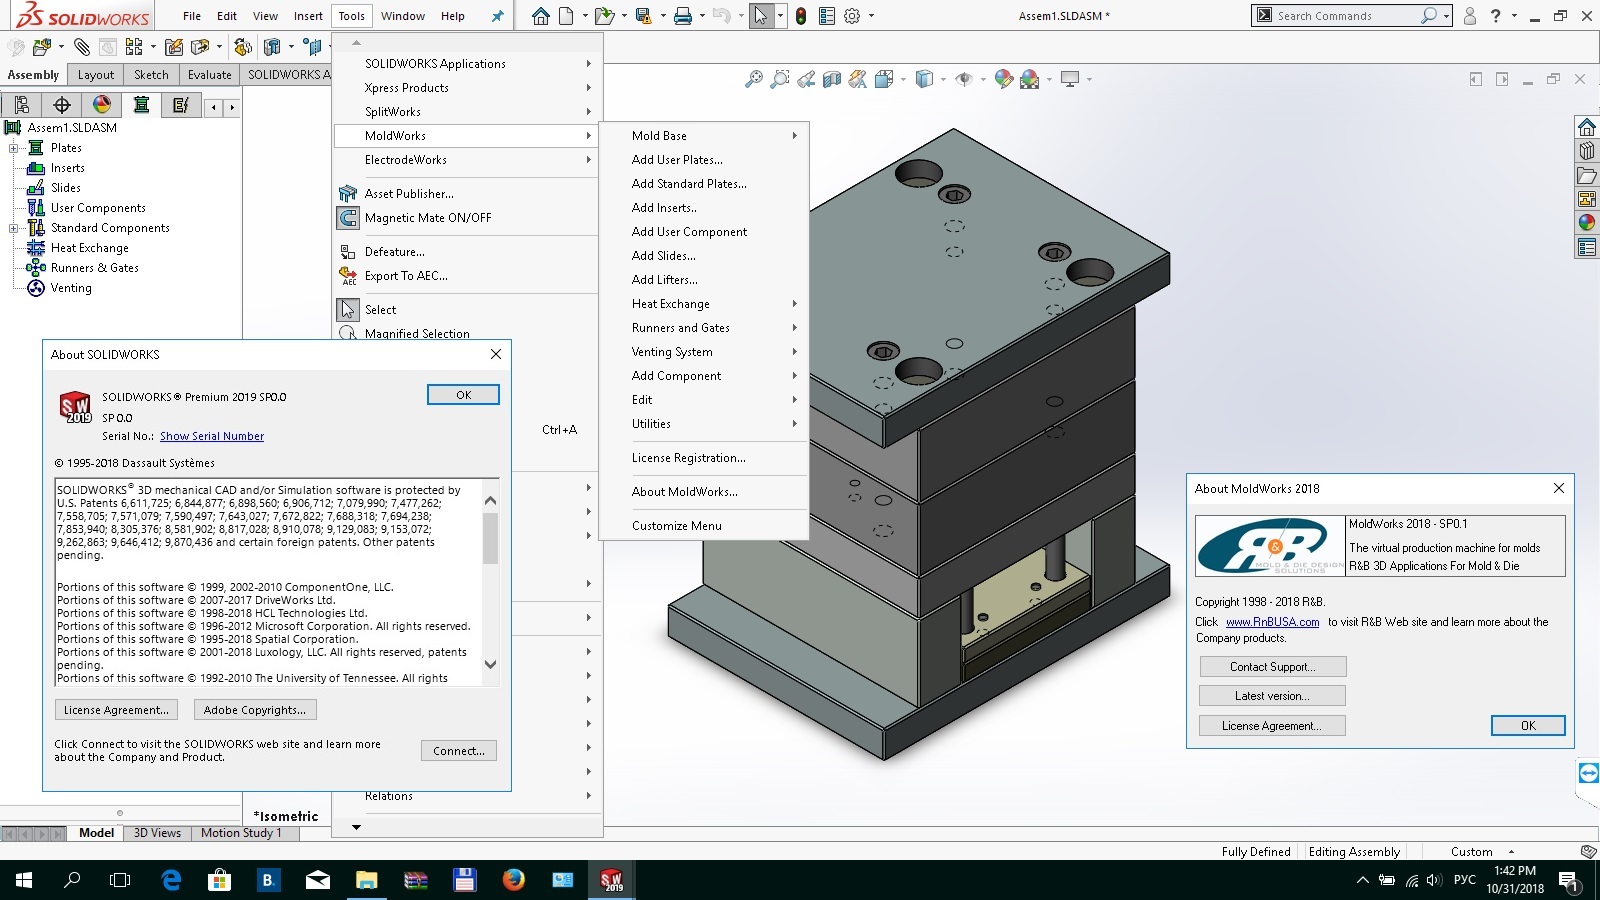 Working with R&B MoldWorks 2018 SP0.1 for SolidWorks 2015-2019 full